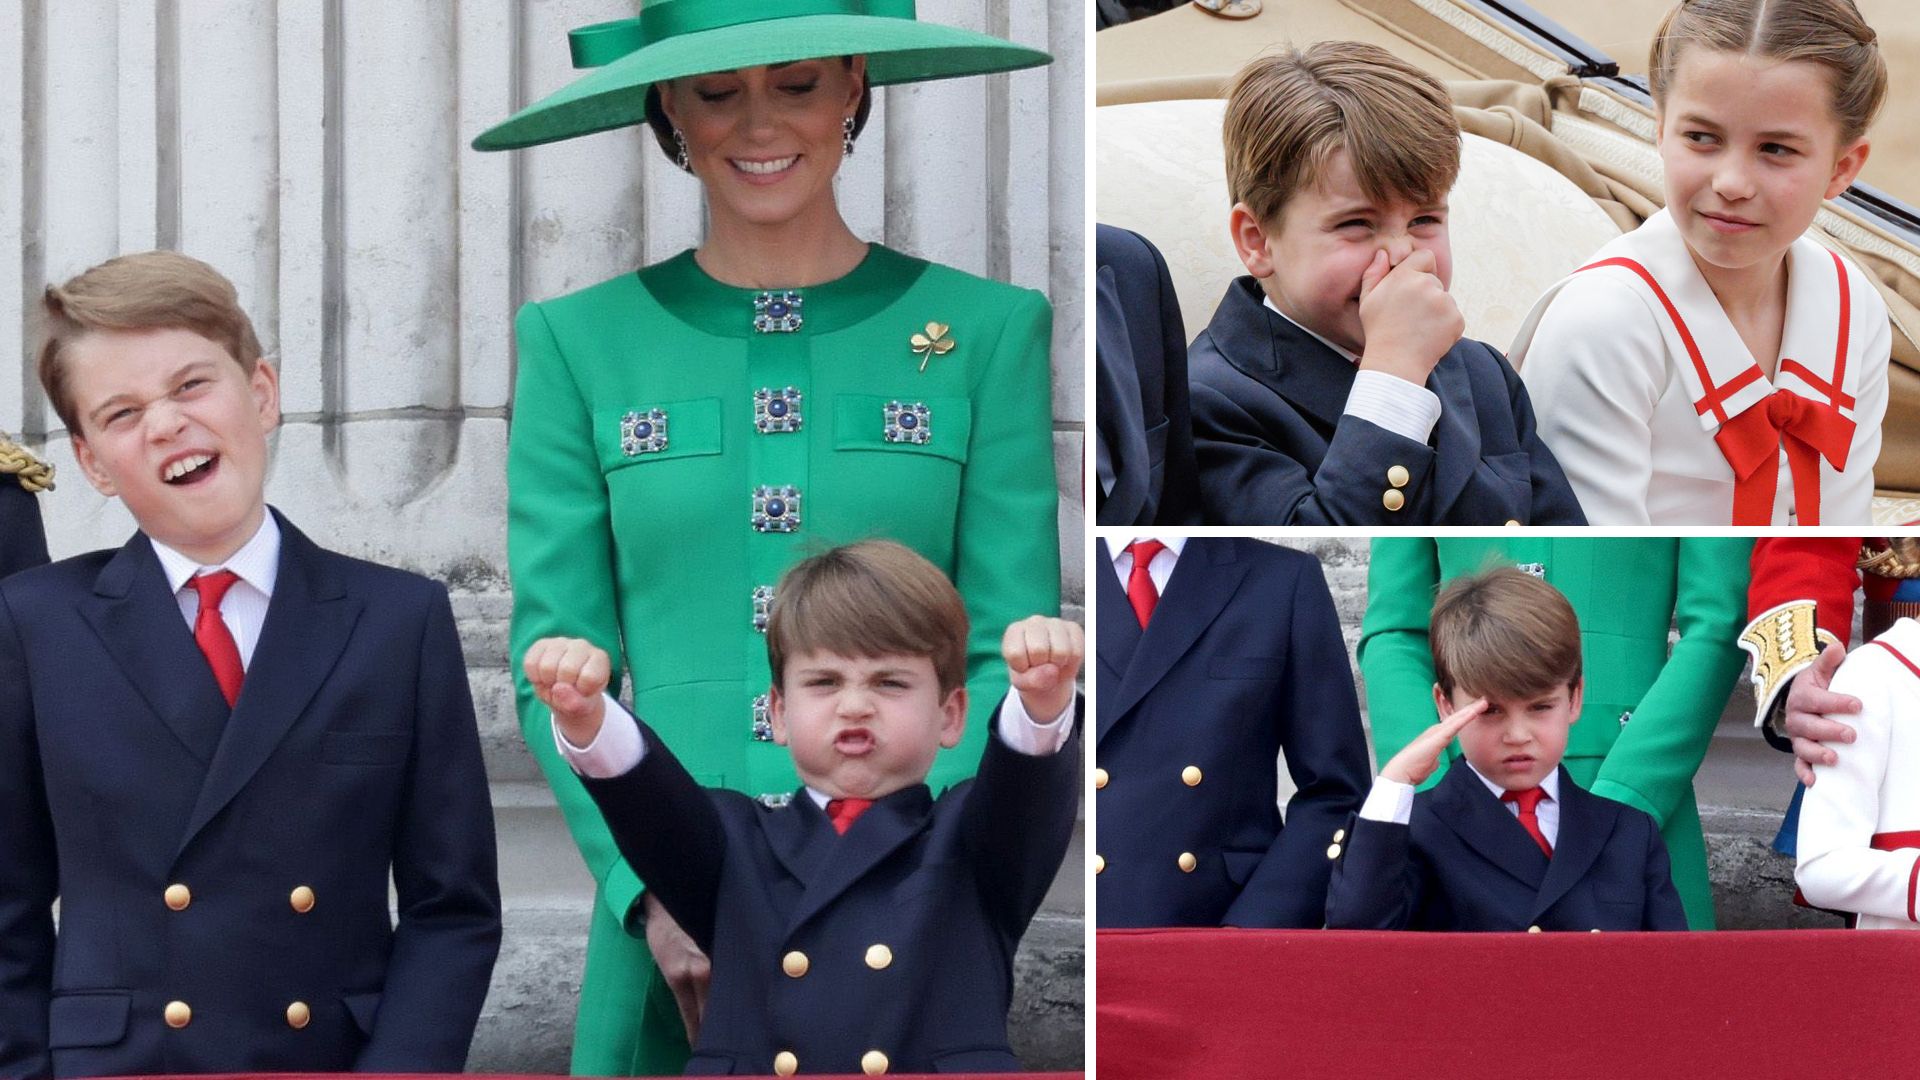 Prince Louis being cheeky and pulling faces with Prince George and Princess Charlotte at Trooping the Colour